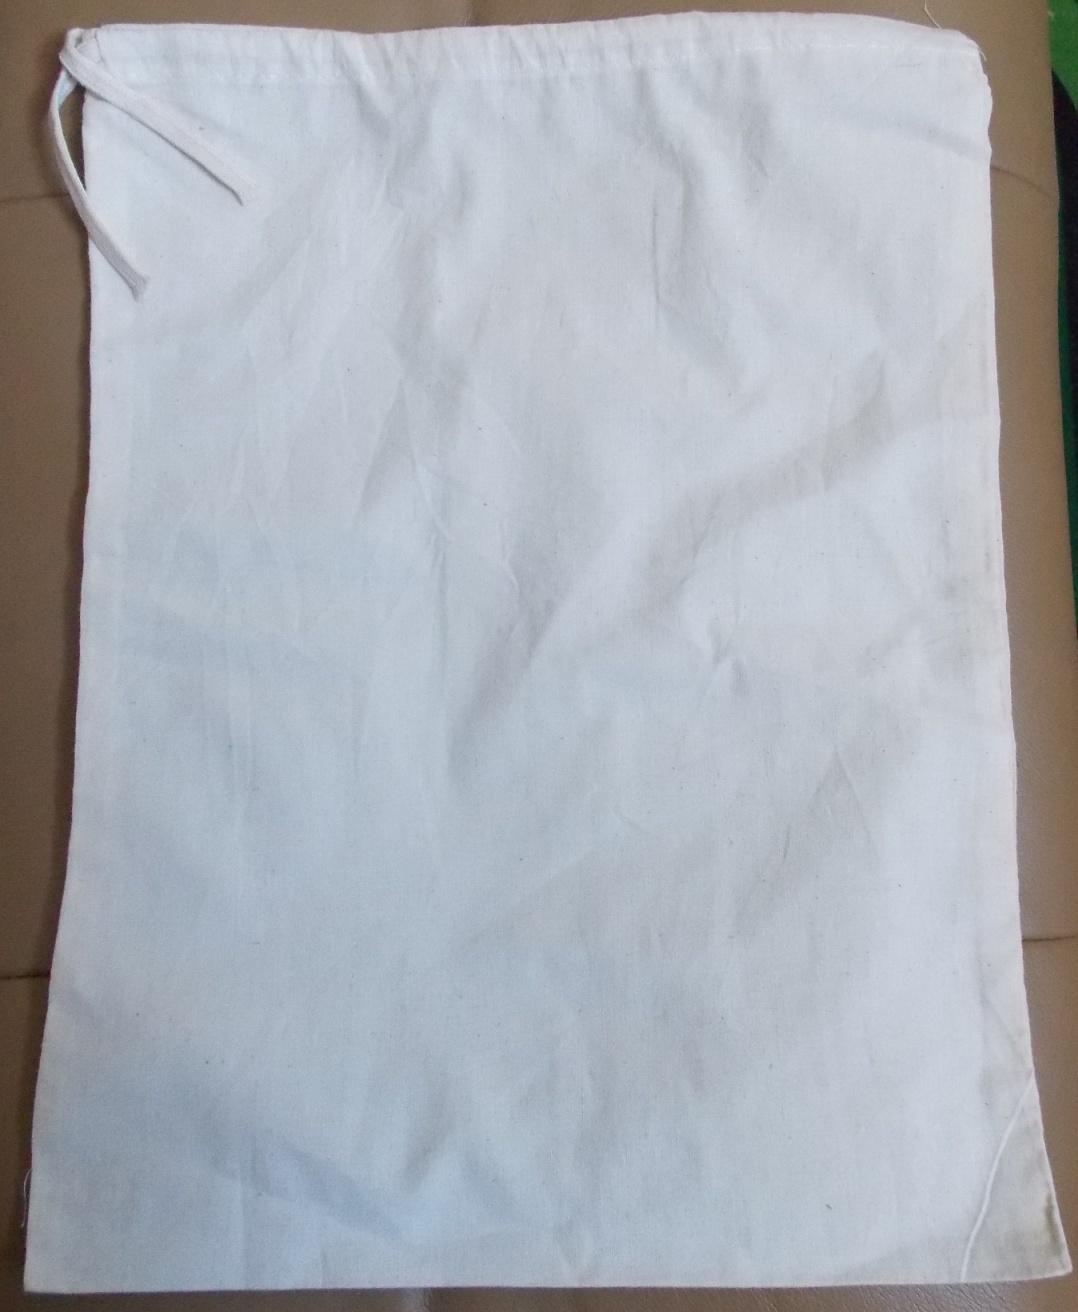 cotton muslin produce bags are our most versatile reusable bag they ...